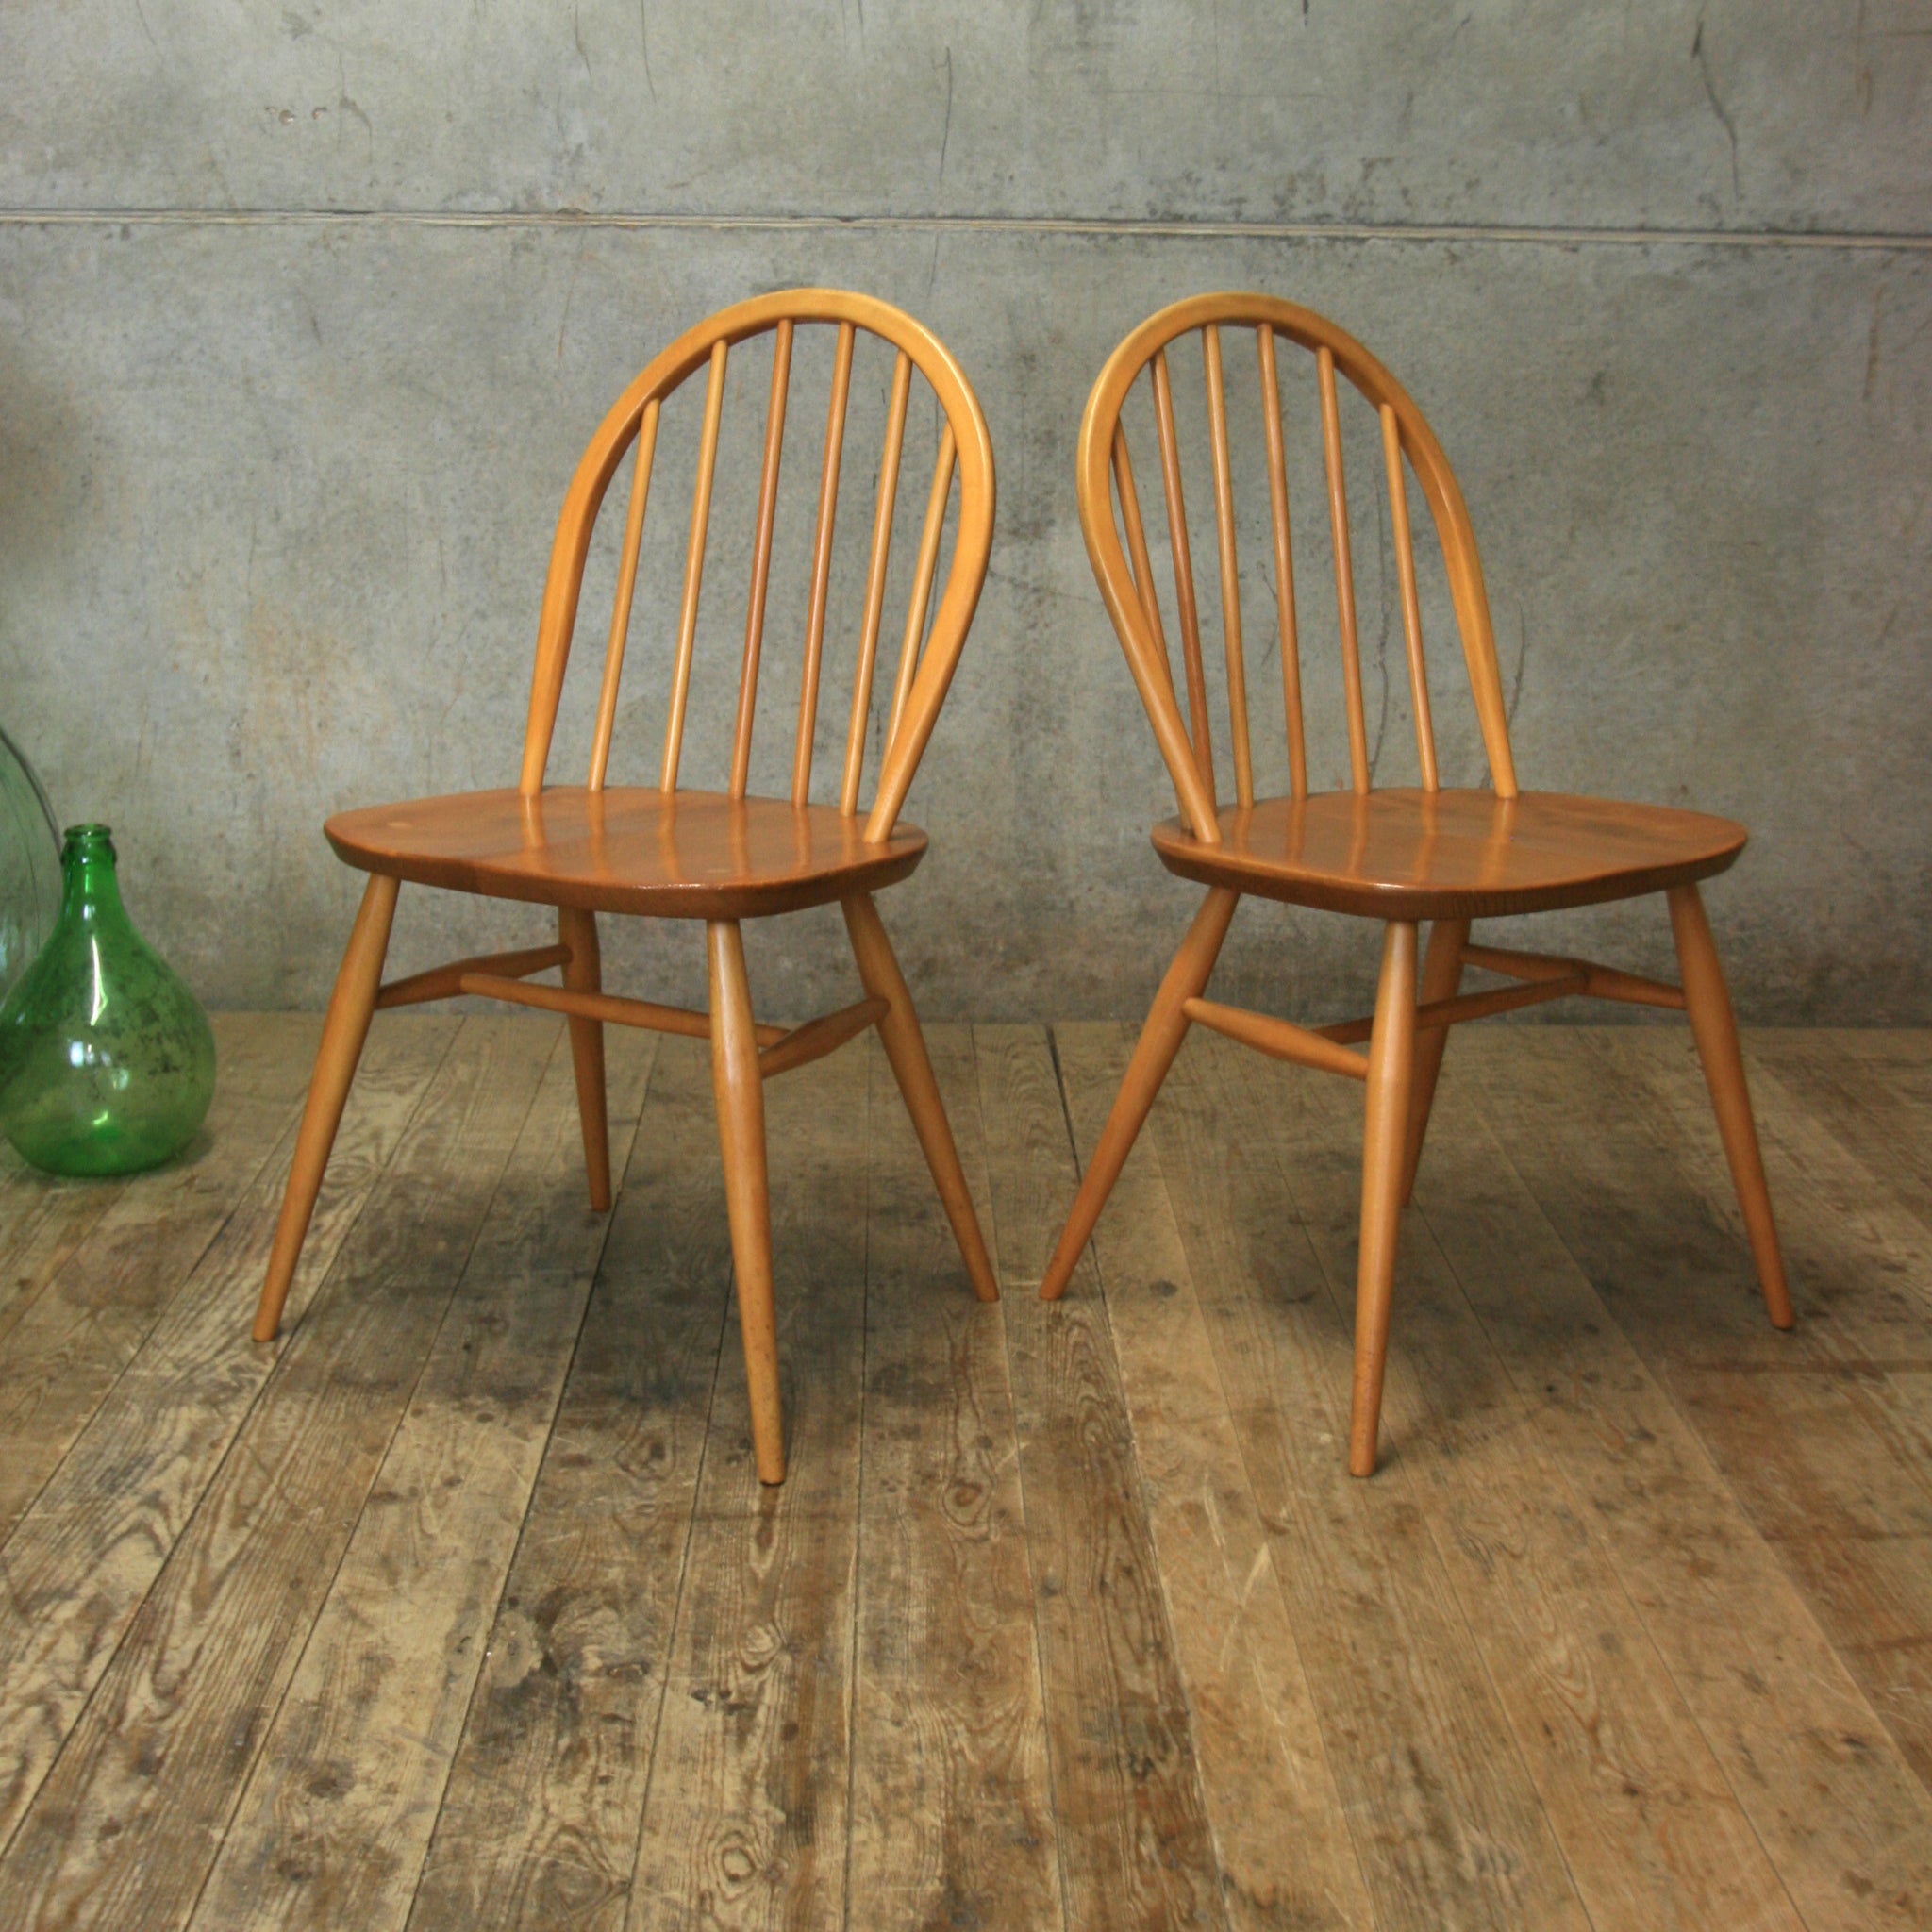 X4 Ercol Windsor Chairs 0706c Mustard Vintage